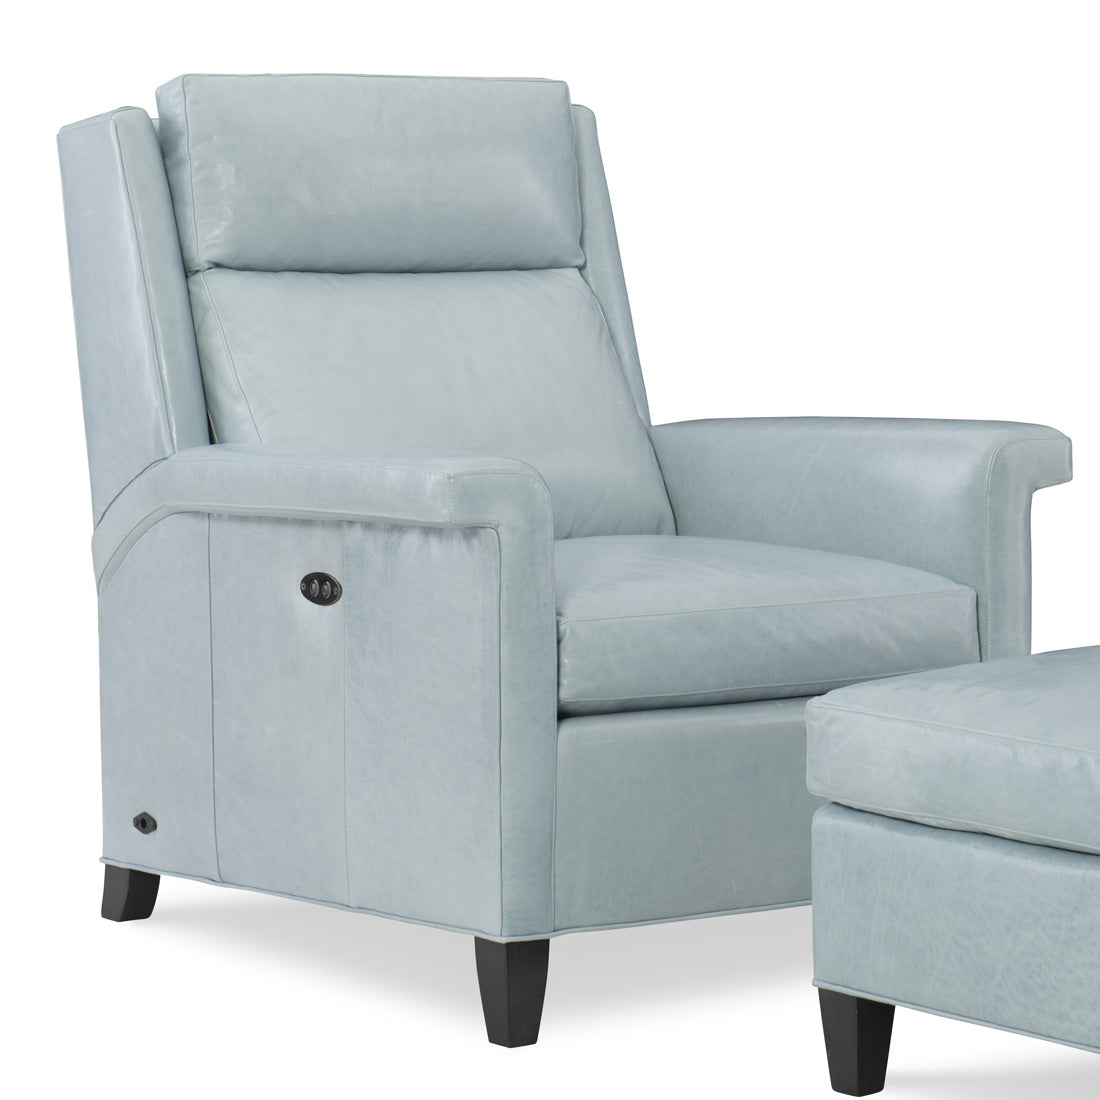 Talley Leather Tilt Back Chair and Ottoman by Wesley Hall shown in Mont Blanc Light Blue leather - close up